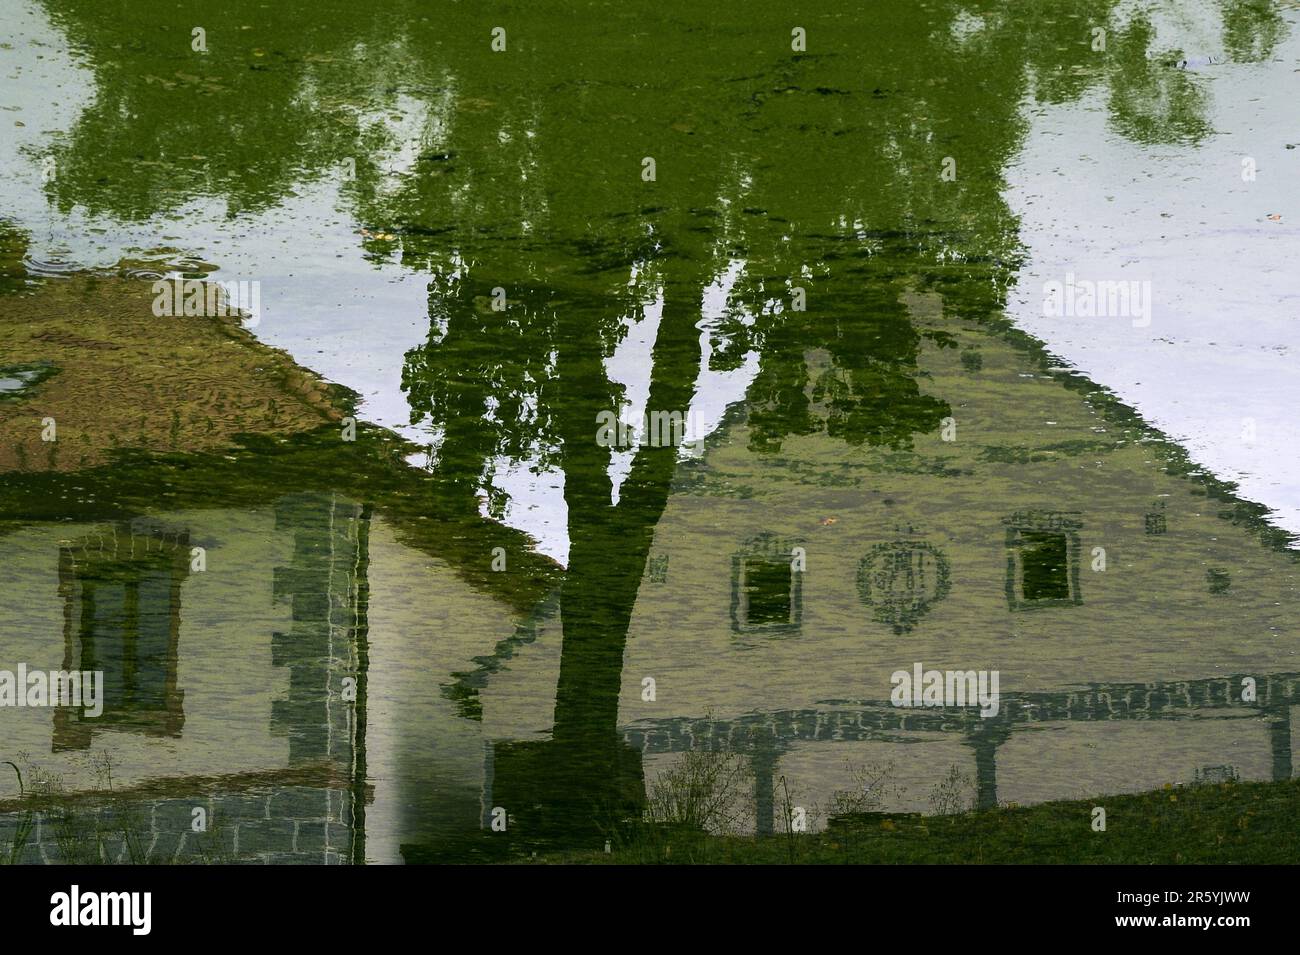 This image has been rotated by 180 degrees.  Houses in Holašovice, South Bohemia, Czech Republic or Czechia, reflected in the still water of a pond on the village green.  Holašovice is a well-preserved example of a traditional Central European village with a ground plan dating from the Middle Ages and a number of 1700s AD and 1800s AD vernacular buildings in a style known as South Bohemian Folk Baroque, Rural Baroque or Rustic Baroque.  In 1997 the village was included in the UNESCO World Cultural Heritage List. Stock Photo